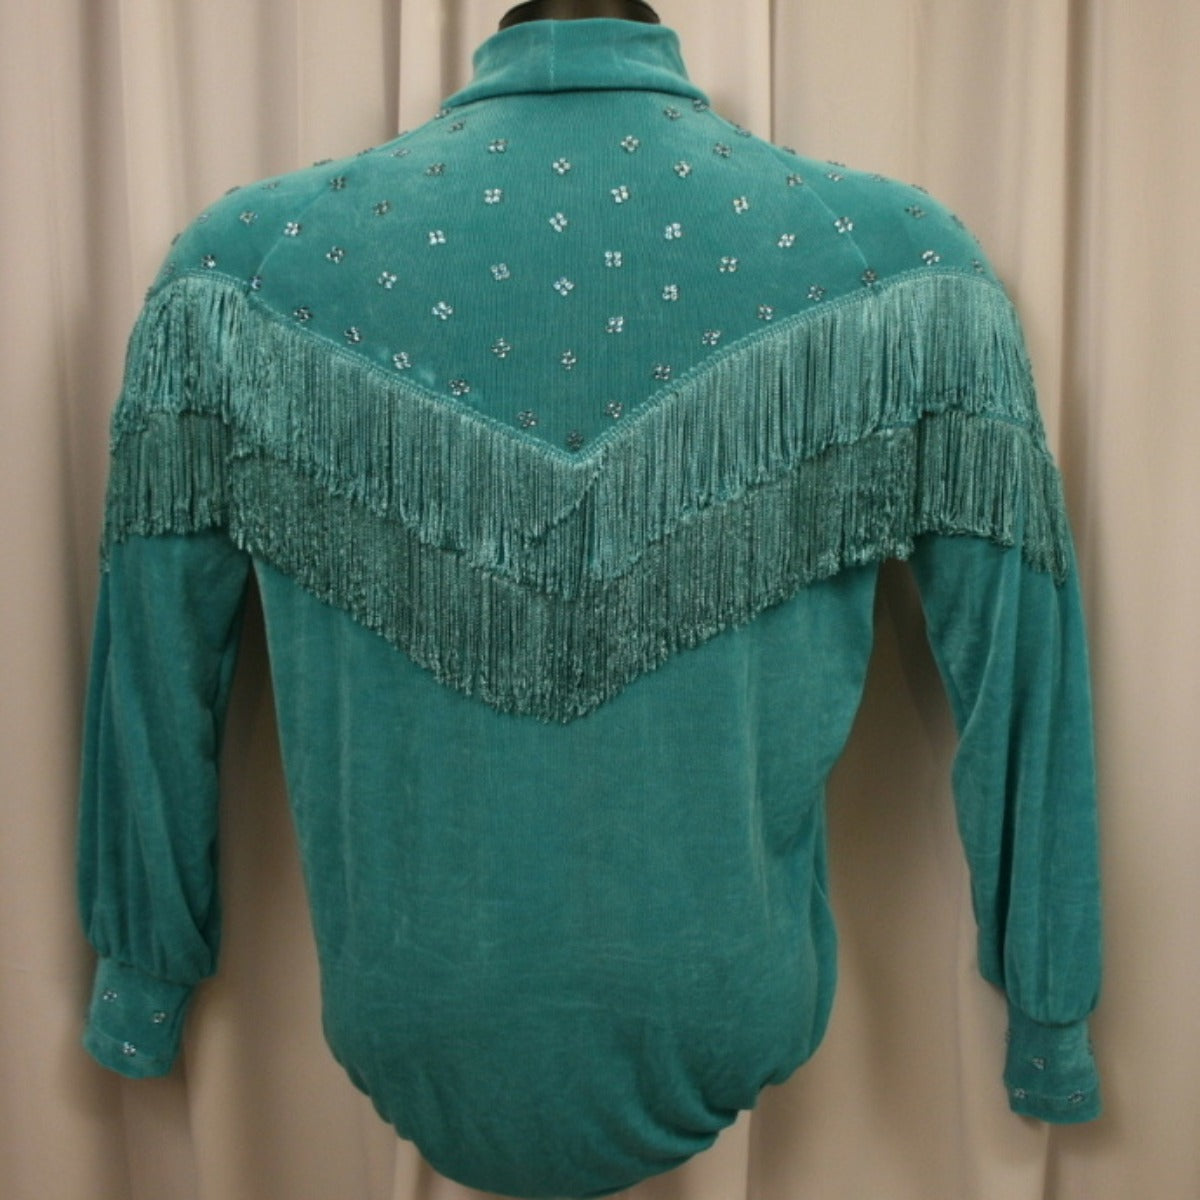 Crystal's Creations back view of men's light teal Latin shirt